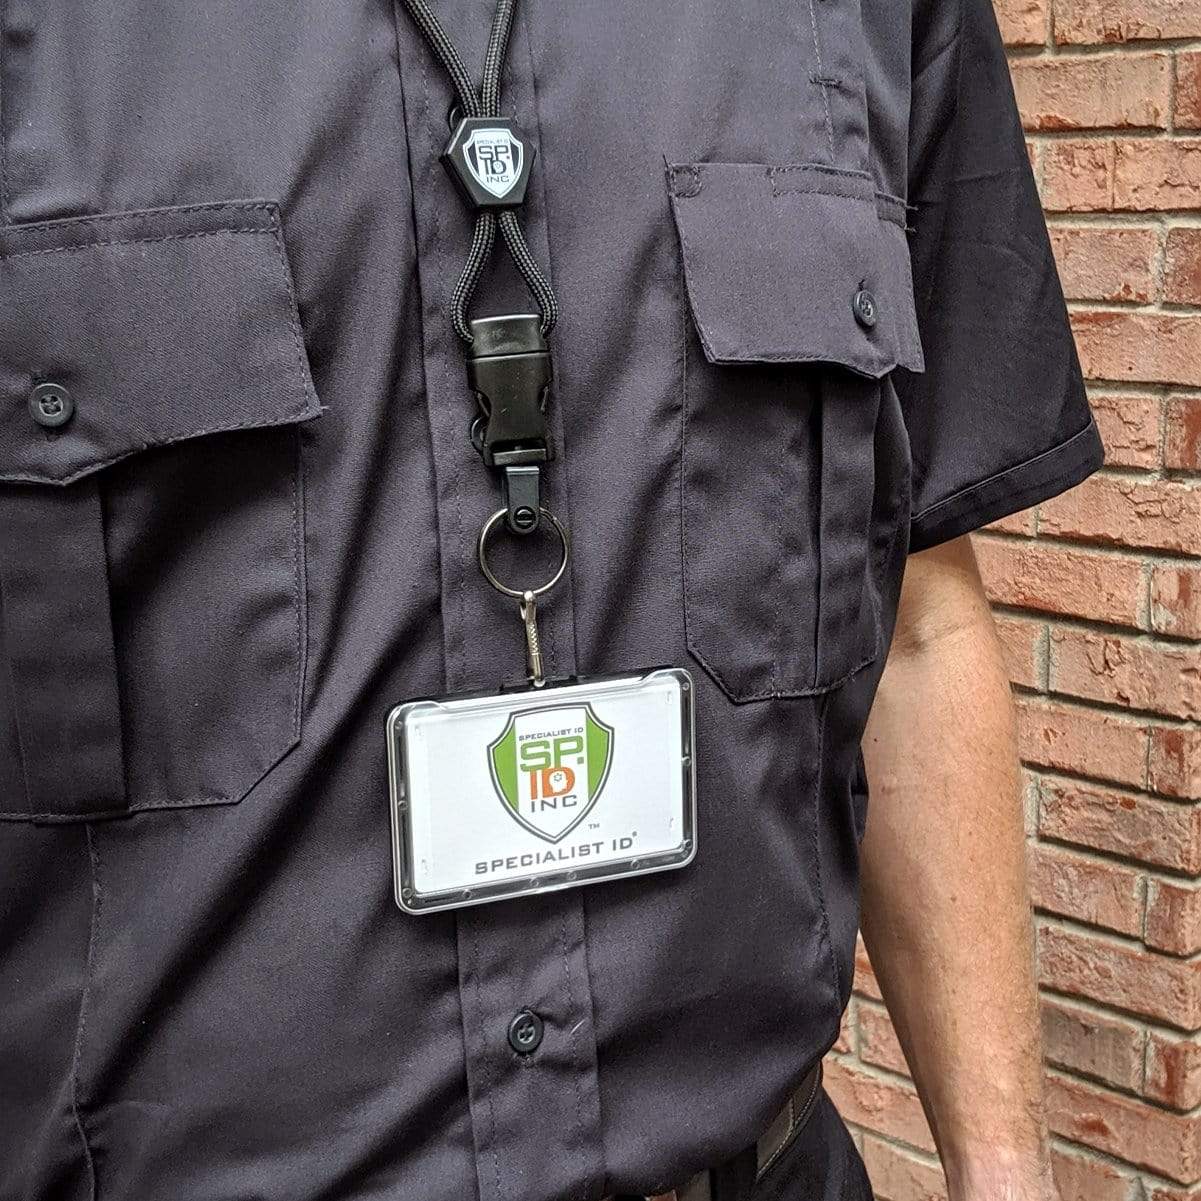 A person standing against a brick wall is wearing professional work wear: a black uniform with dual chest pockets, and displaying a Specialist ID Horizontal 3 Card Badge Holder & Heavy Duty Lanyard with Breakaway Clip and Key Ring - Hard Plastic Rigid Name Tag Protector - Top Load for Three Badges secured in a badge holder hanging from a breakaway lanyard.